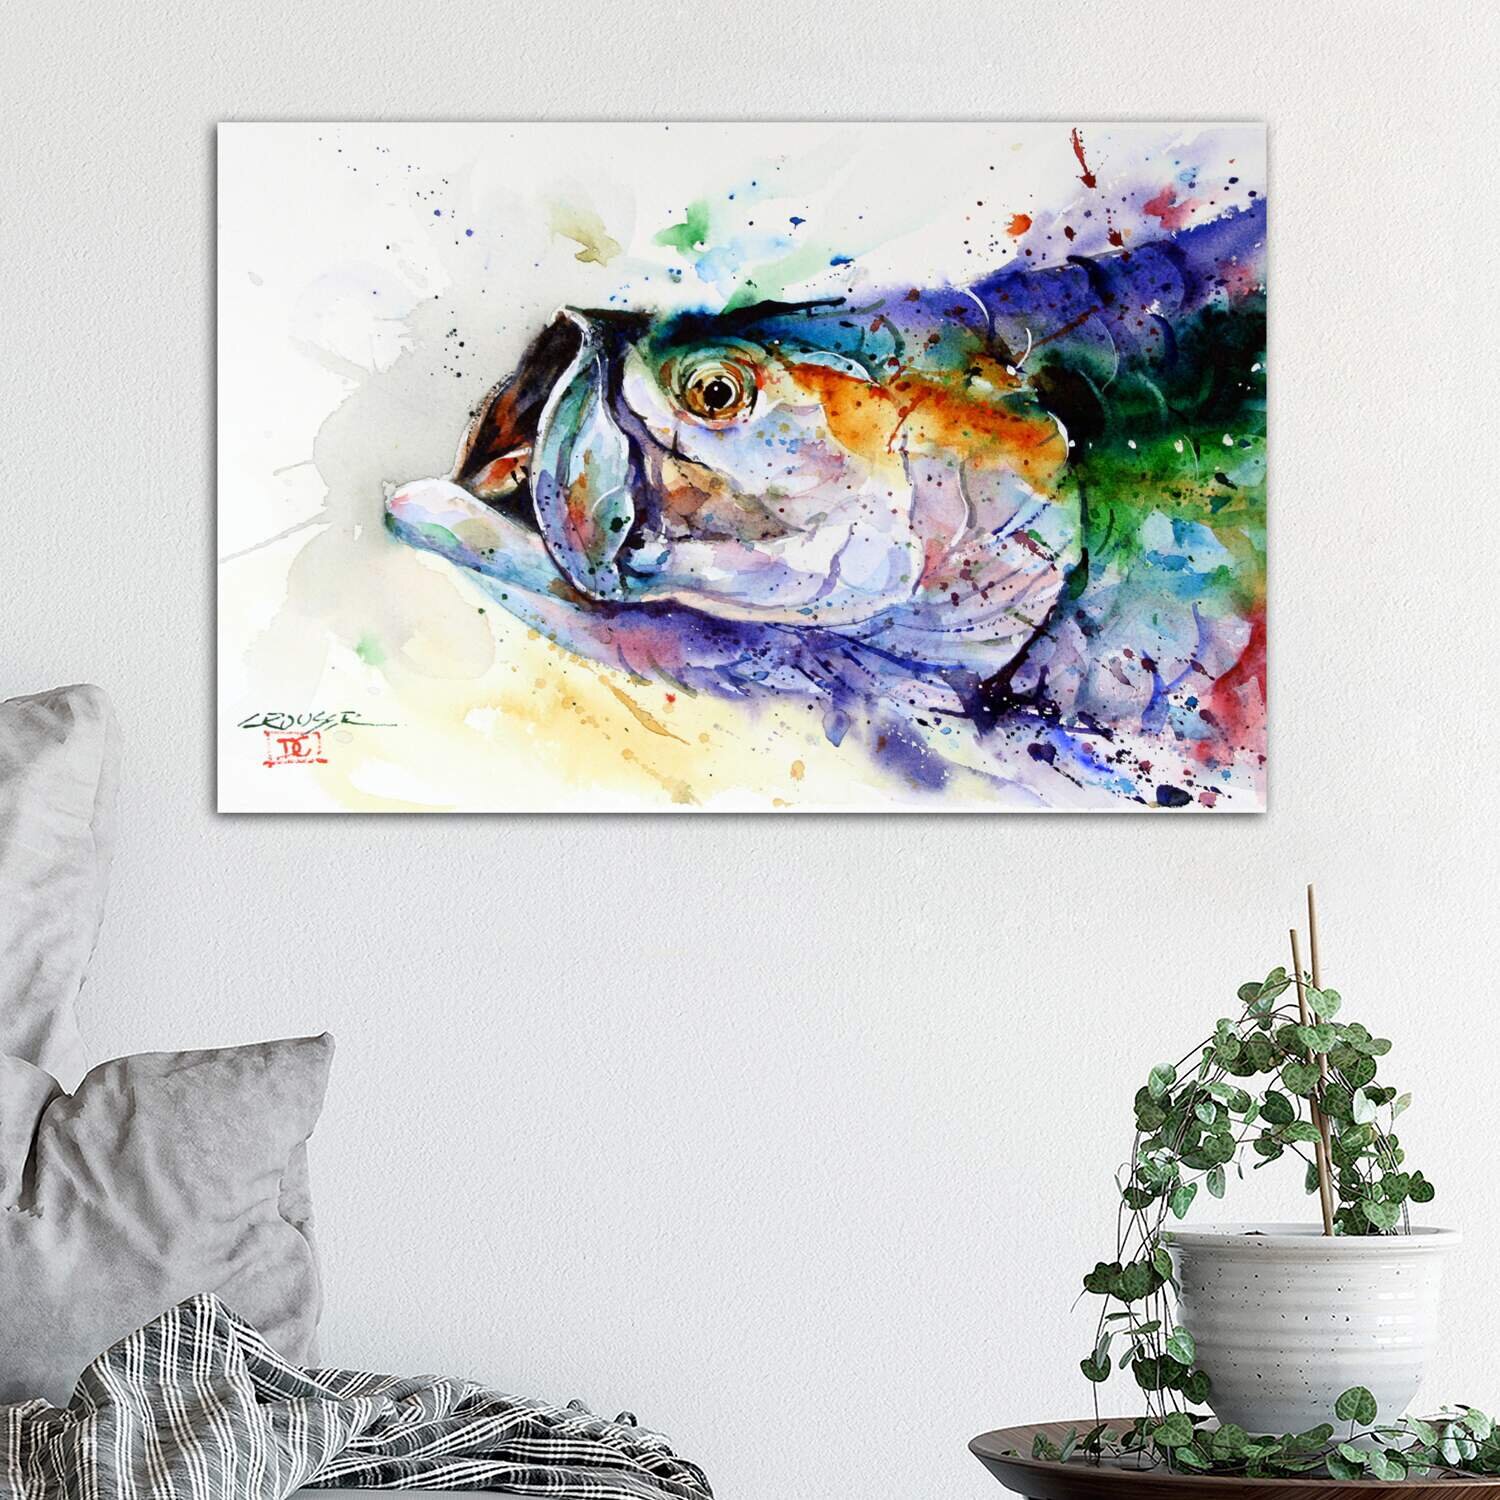  Fish ' - Picture Frame Painting Print East Urban Home Format: Wrapped Canvas, Size: 18 H x 26 W x 1.5 D